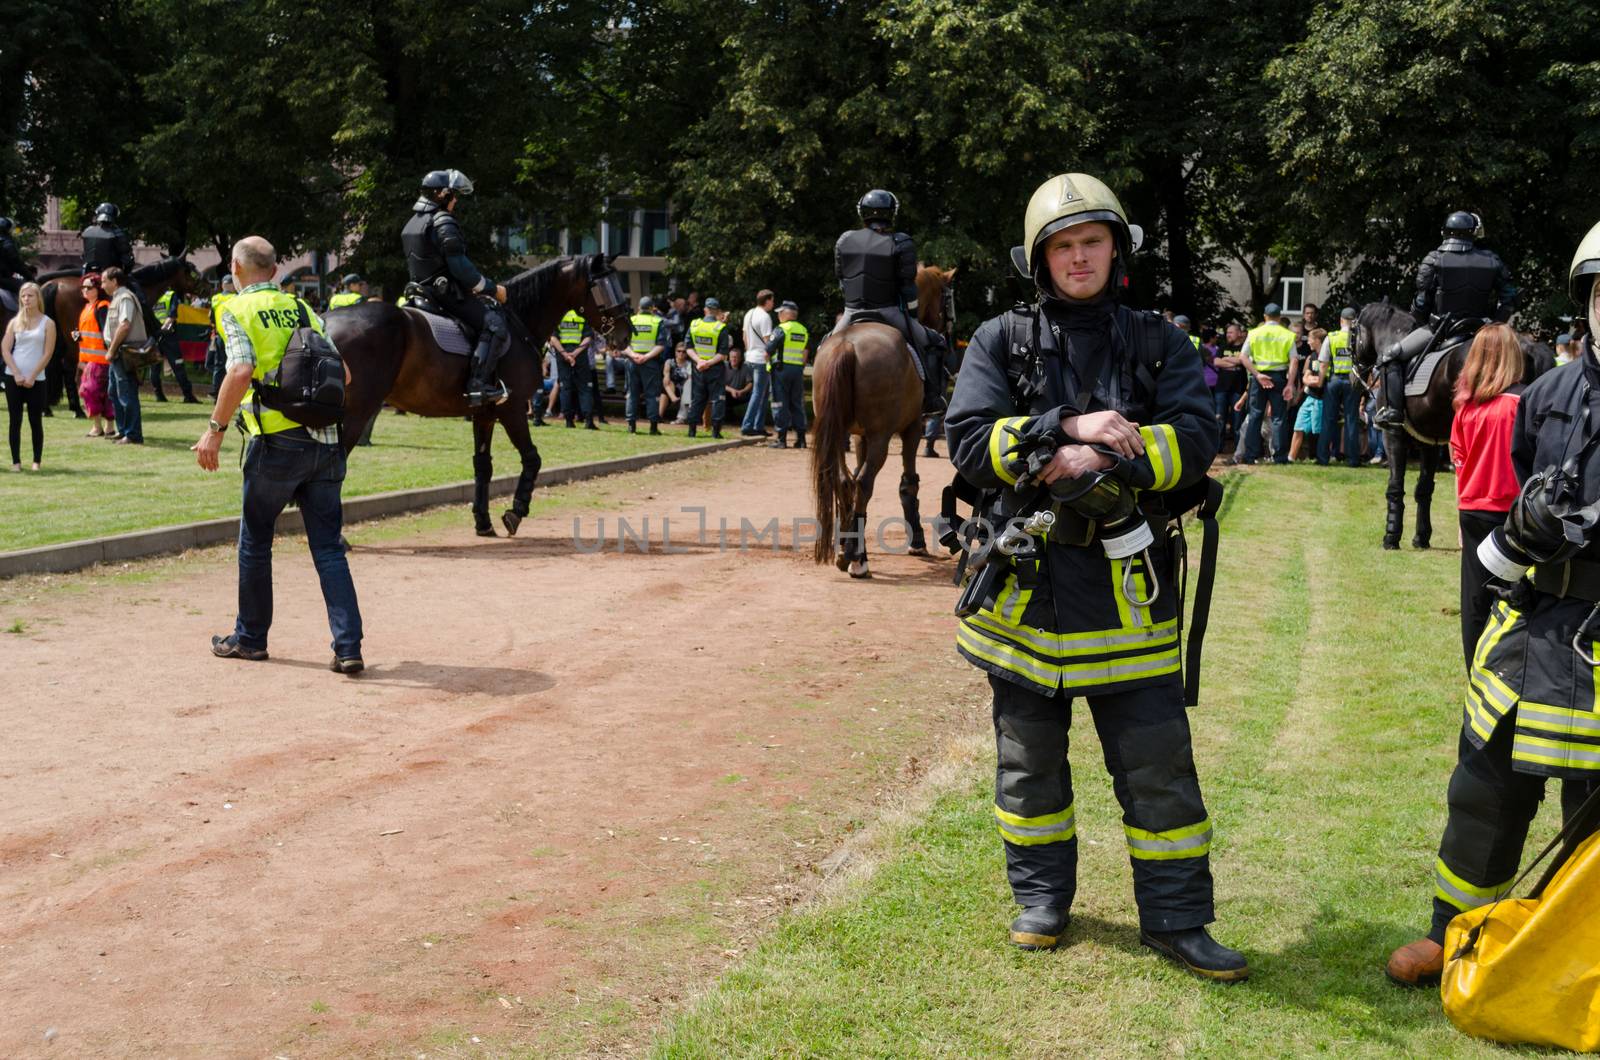 fireman with special equipment at public event by sauletas